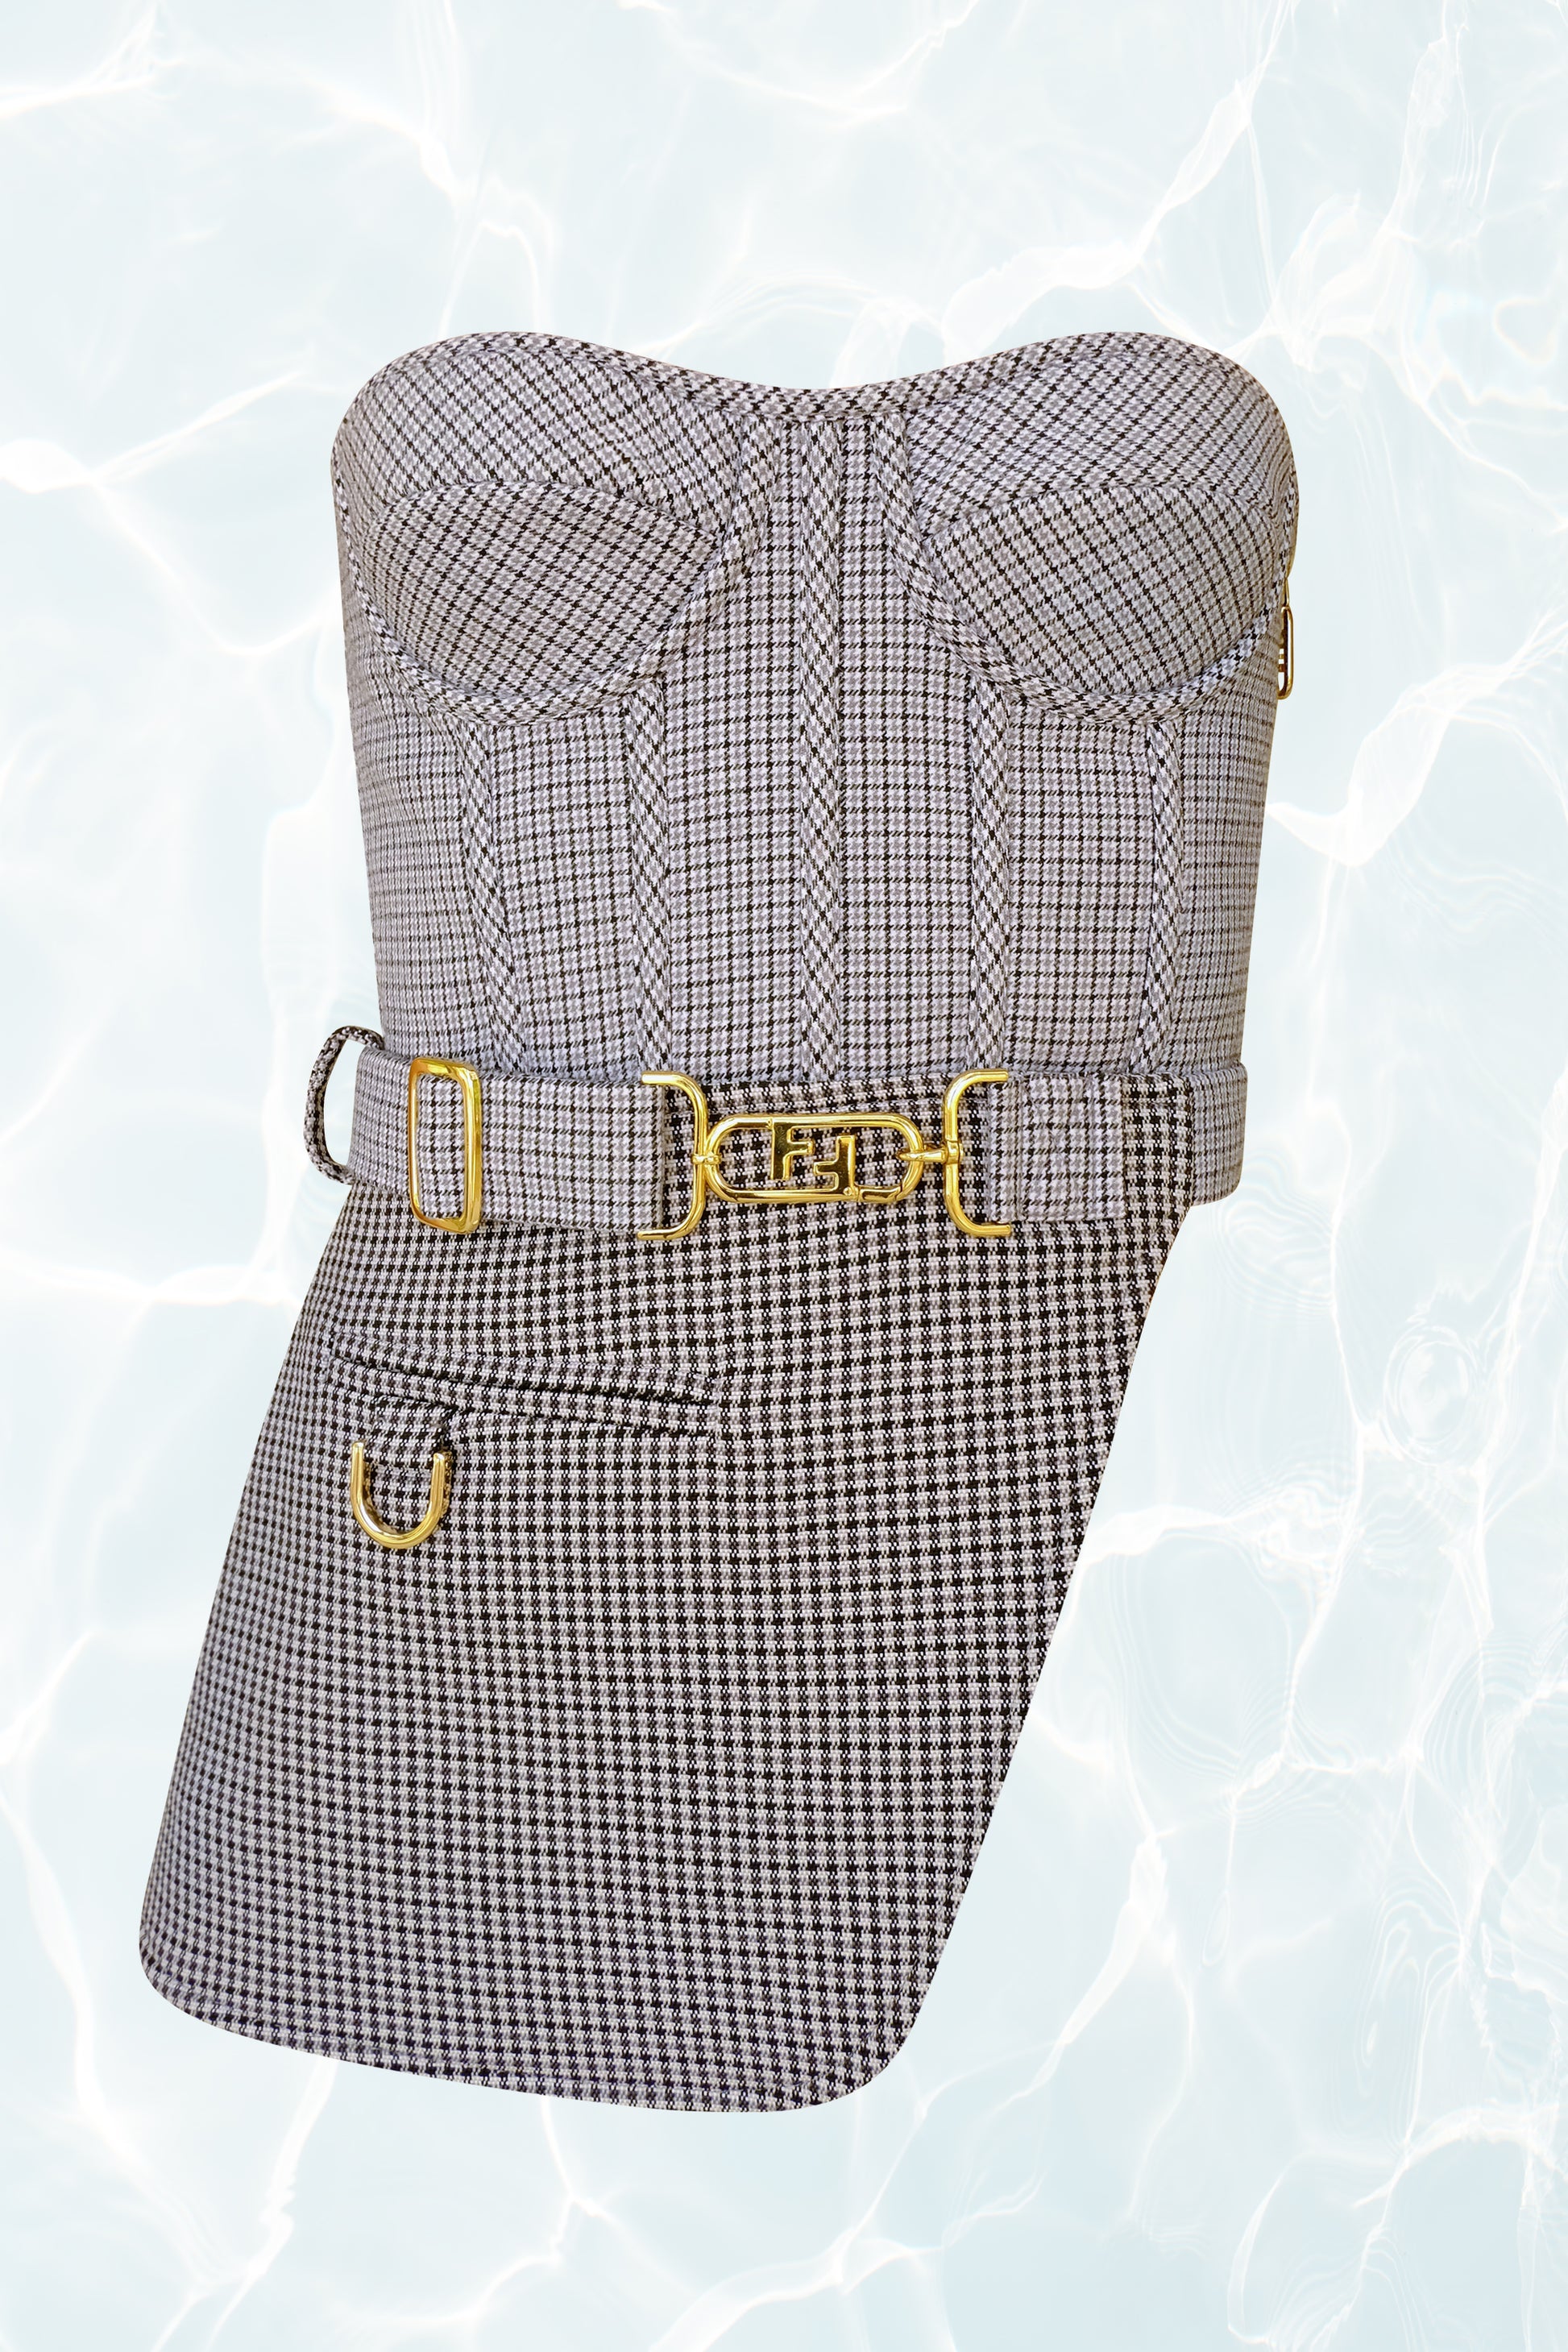 Fendi AW 2022 Strapless Houndstooth Bustier with Gold Logo Details